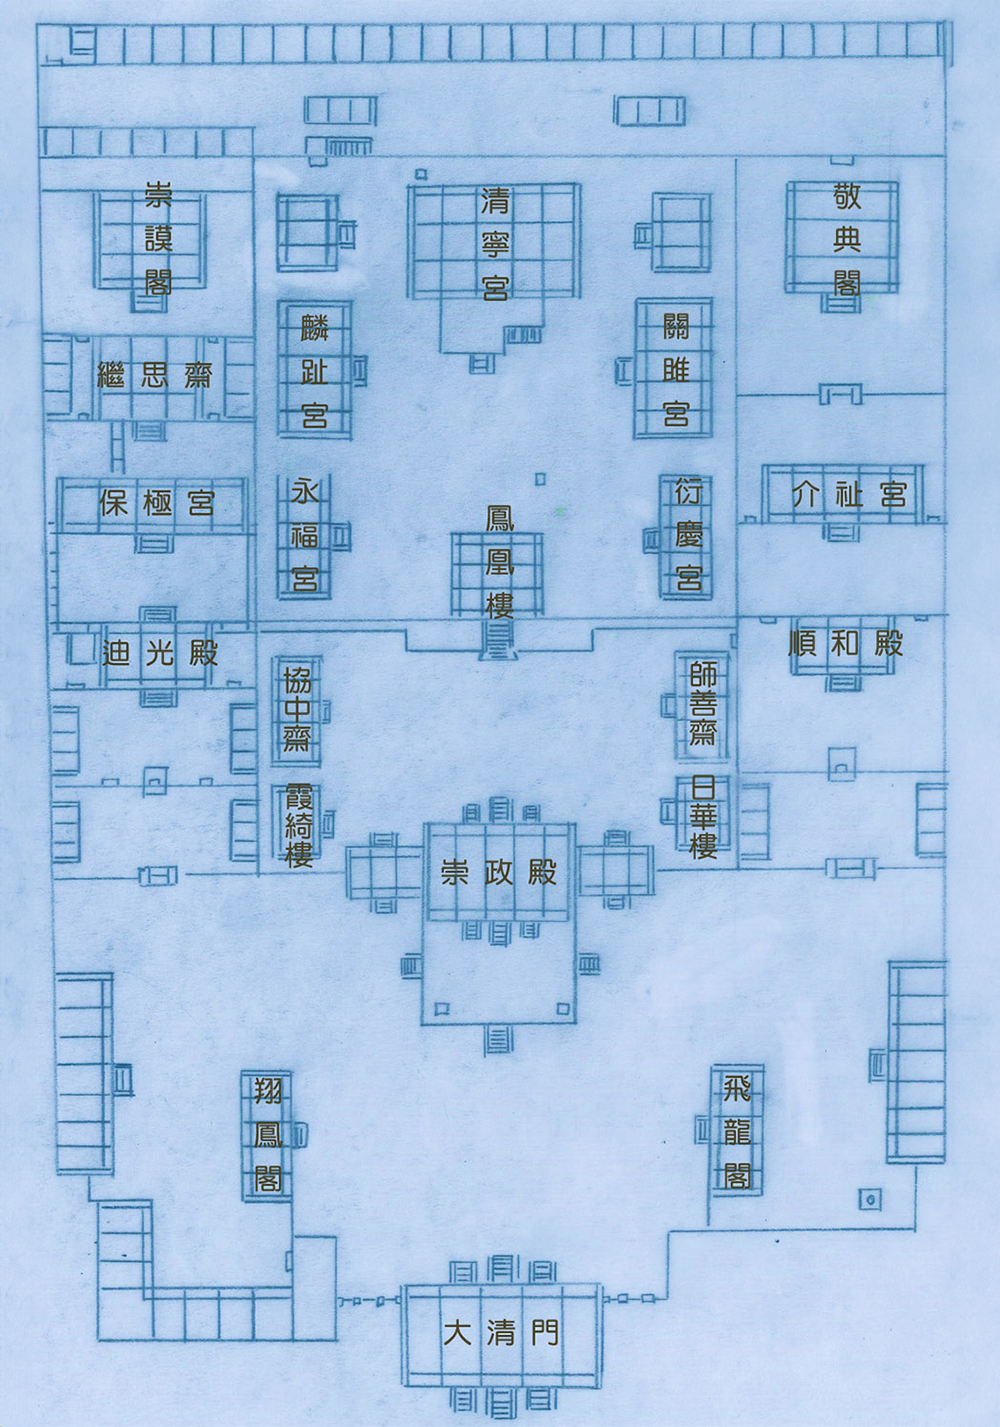 Floor plan of the central section in Shengjing_preview